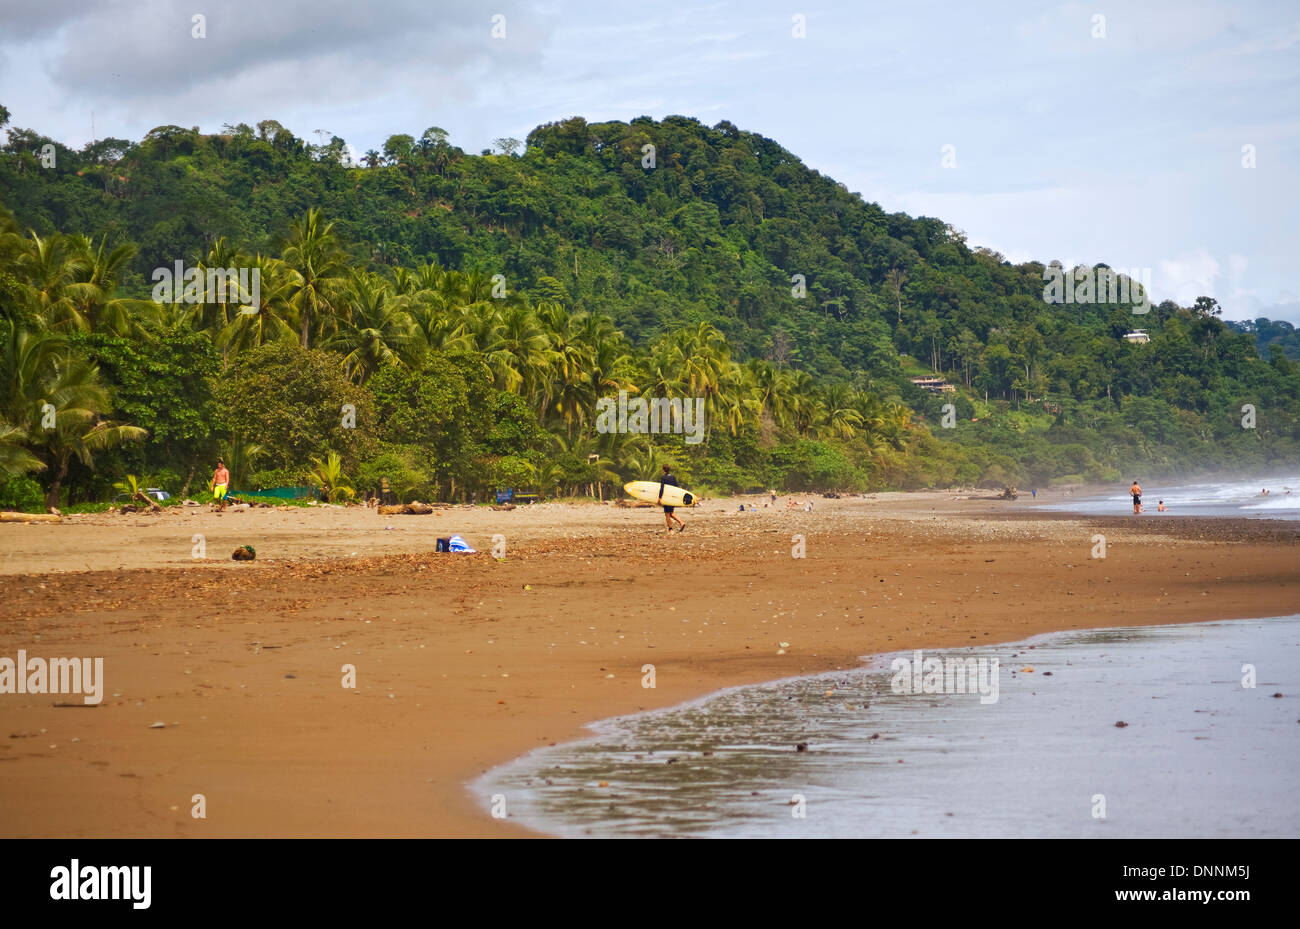 Beach at Dominical, Costa Rica Stock Photo